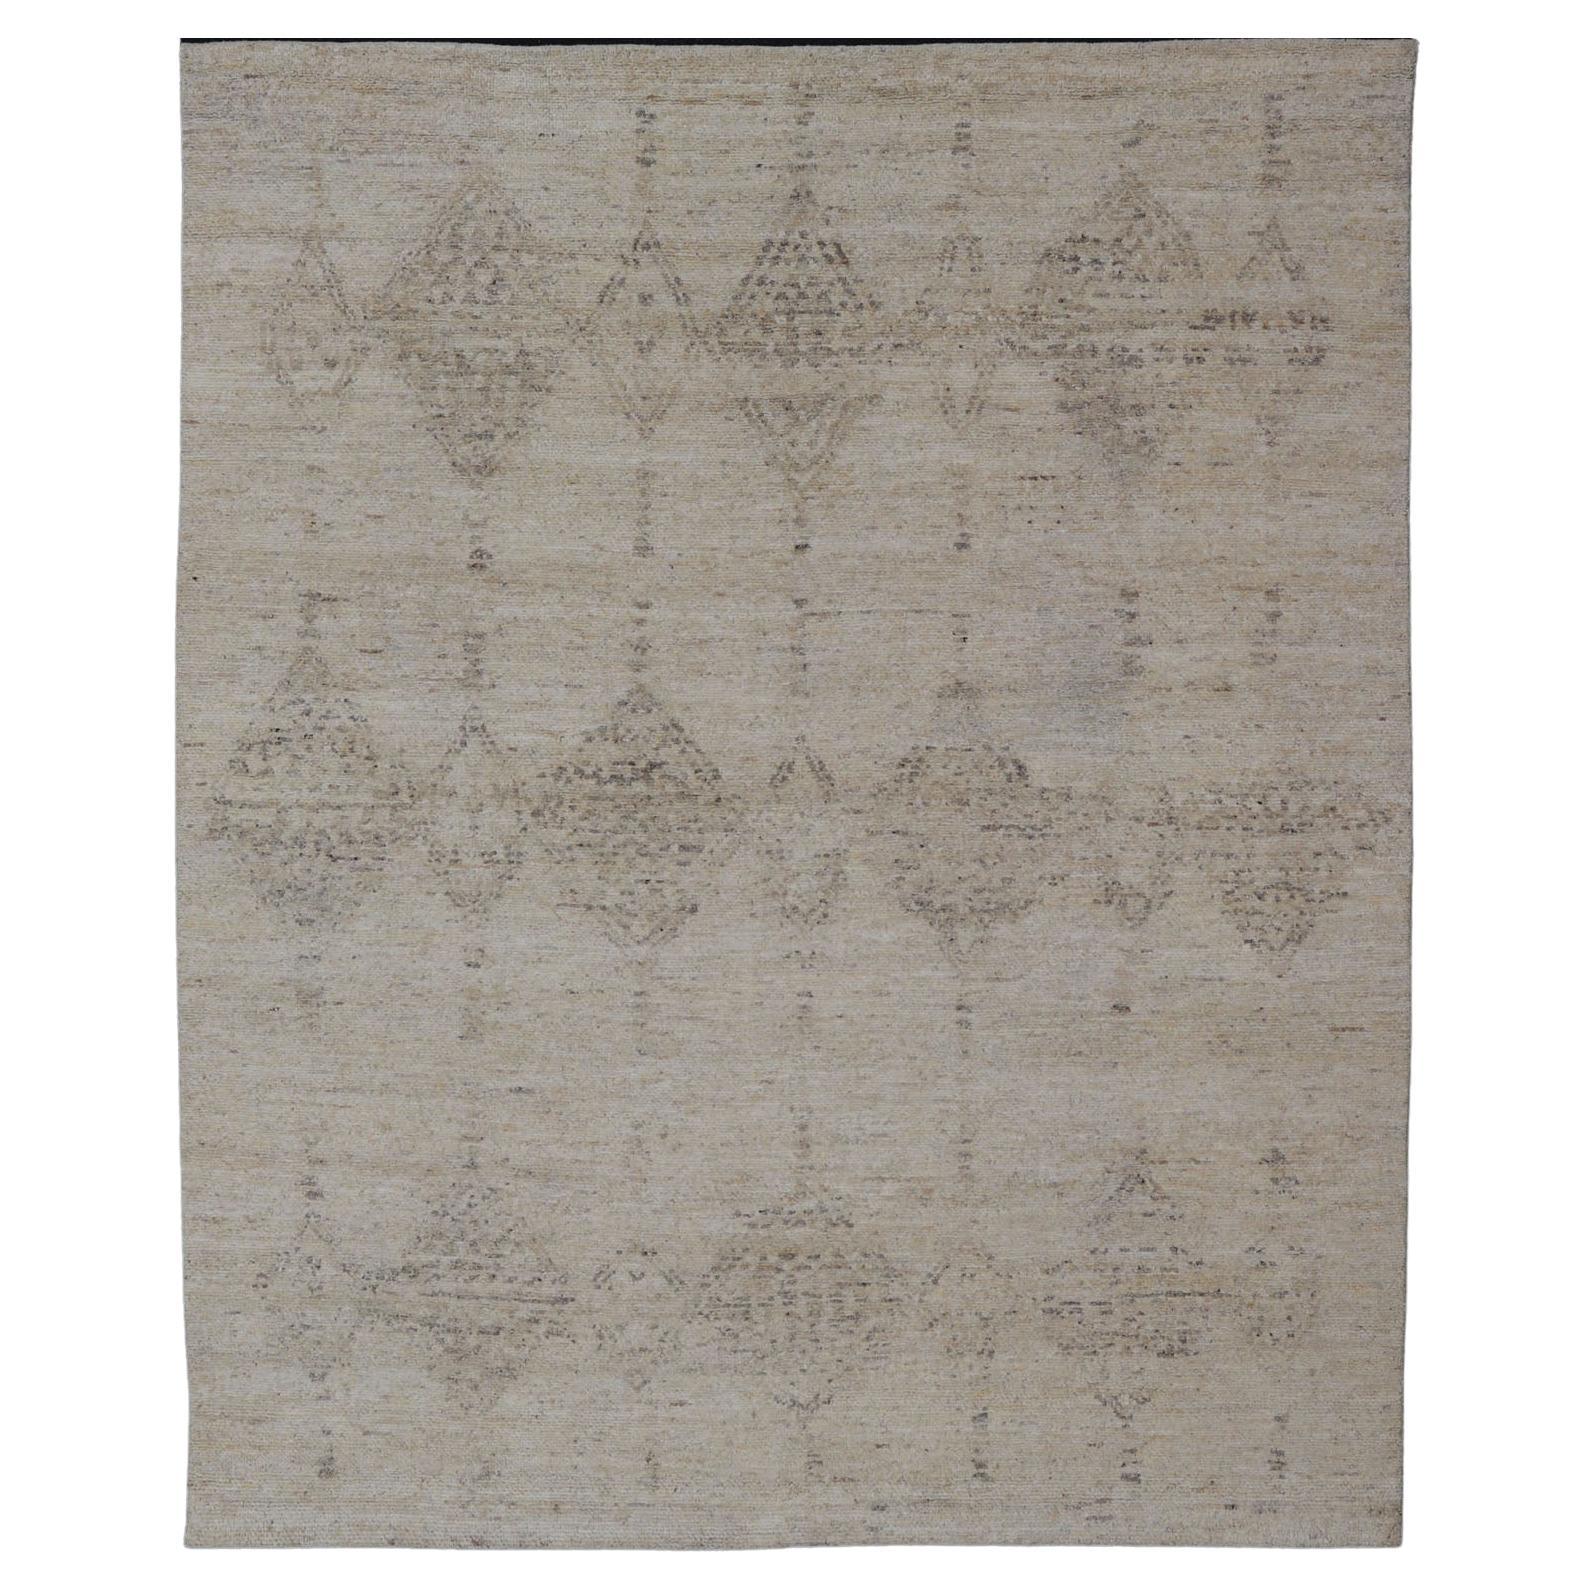 Modern Rug in Creamy Beige Color Tones and Moroccan Style Diamonds in Light Gray